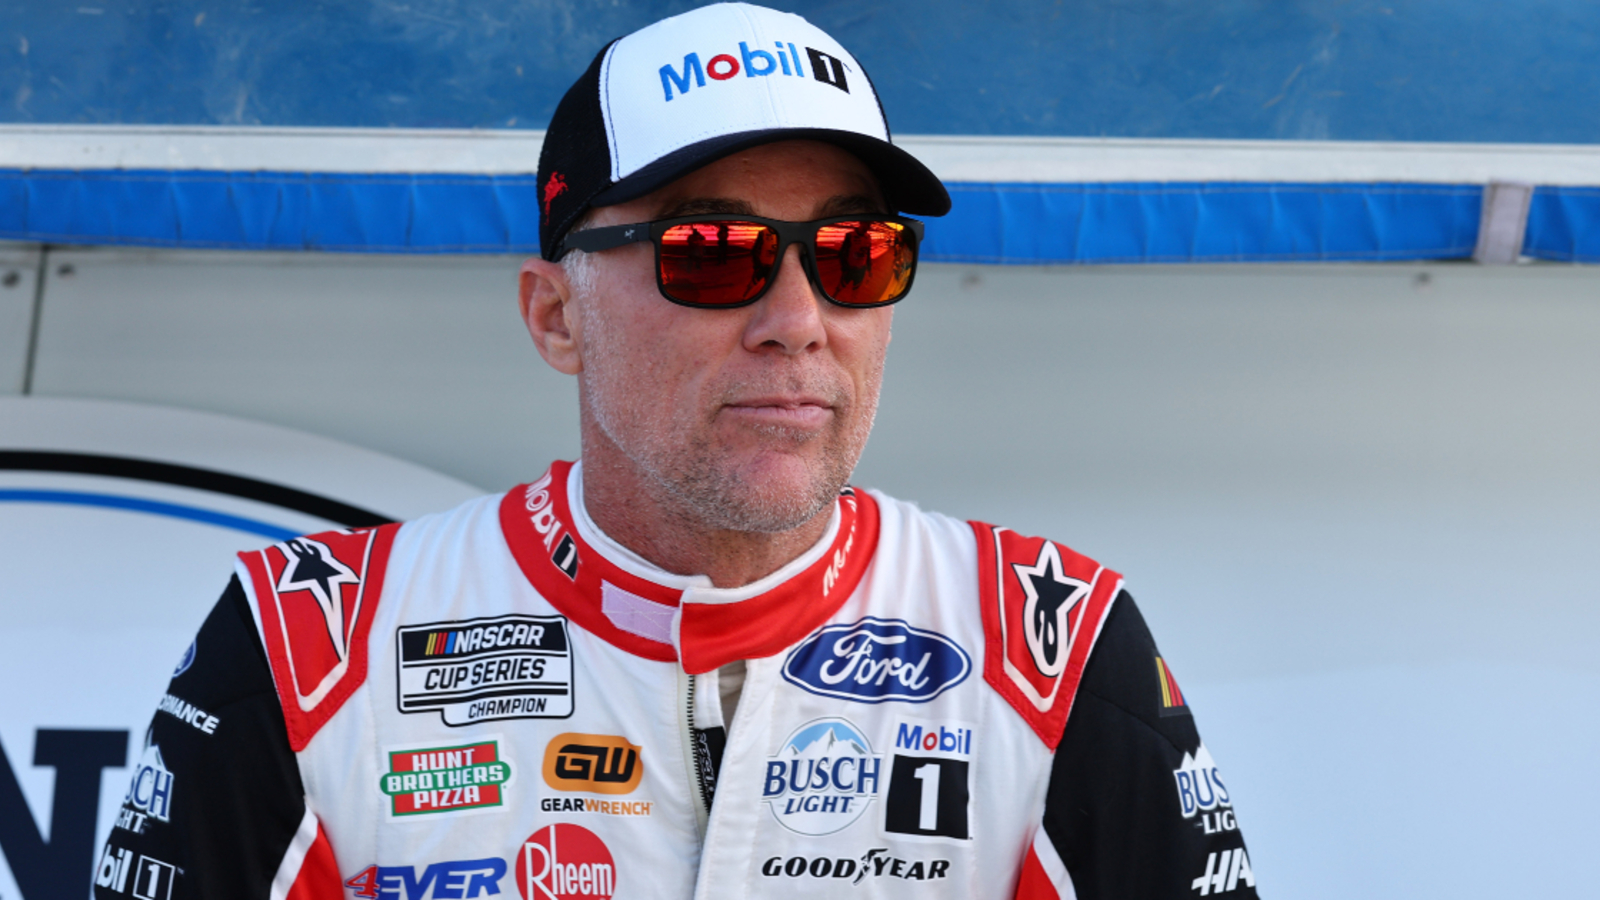 Kevin Harvick making historic 775th consecutive Cup Series start, third all-time